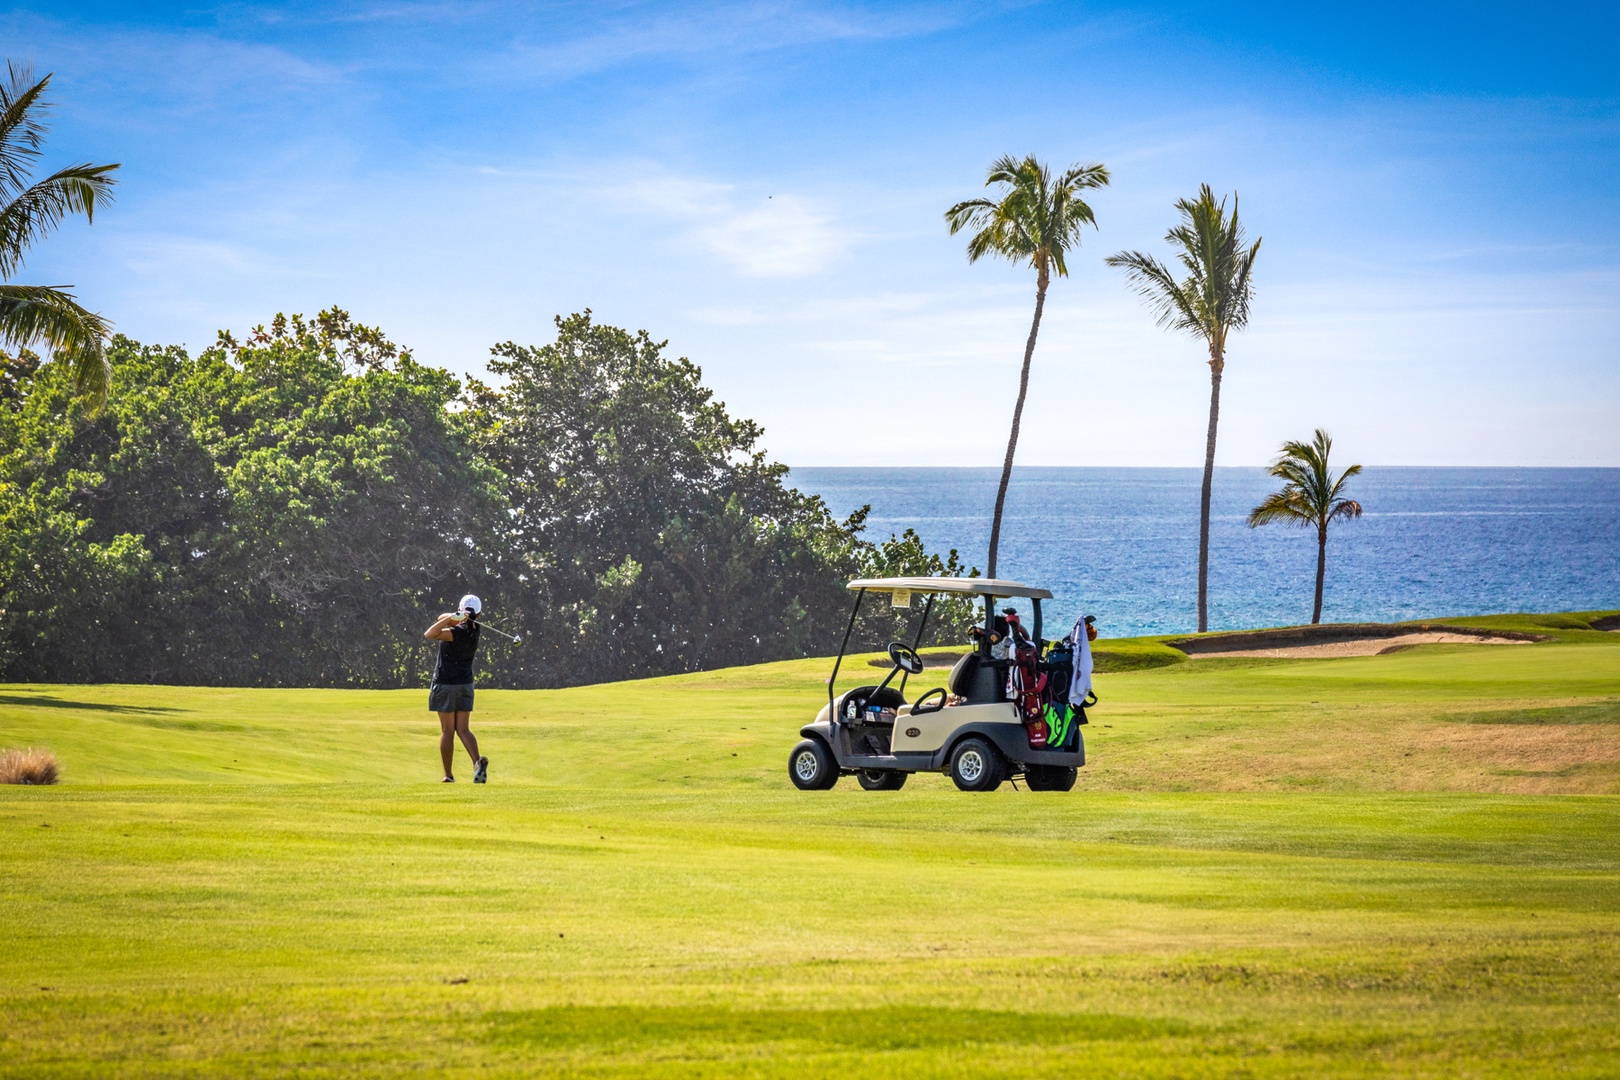 Waikoloa Vacation Rentals, 2BD Hali'i Kai 12C at Waikoloa Resort - Some of the most beautiful golf on earth available just steps outside the condo.